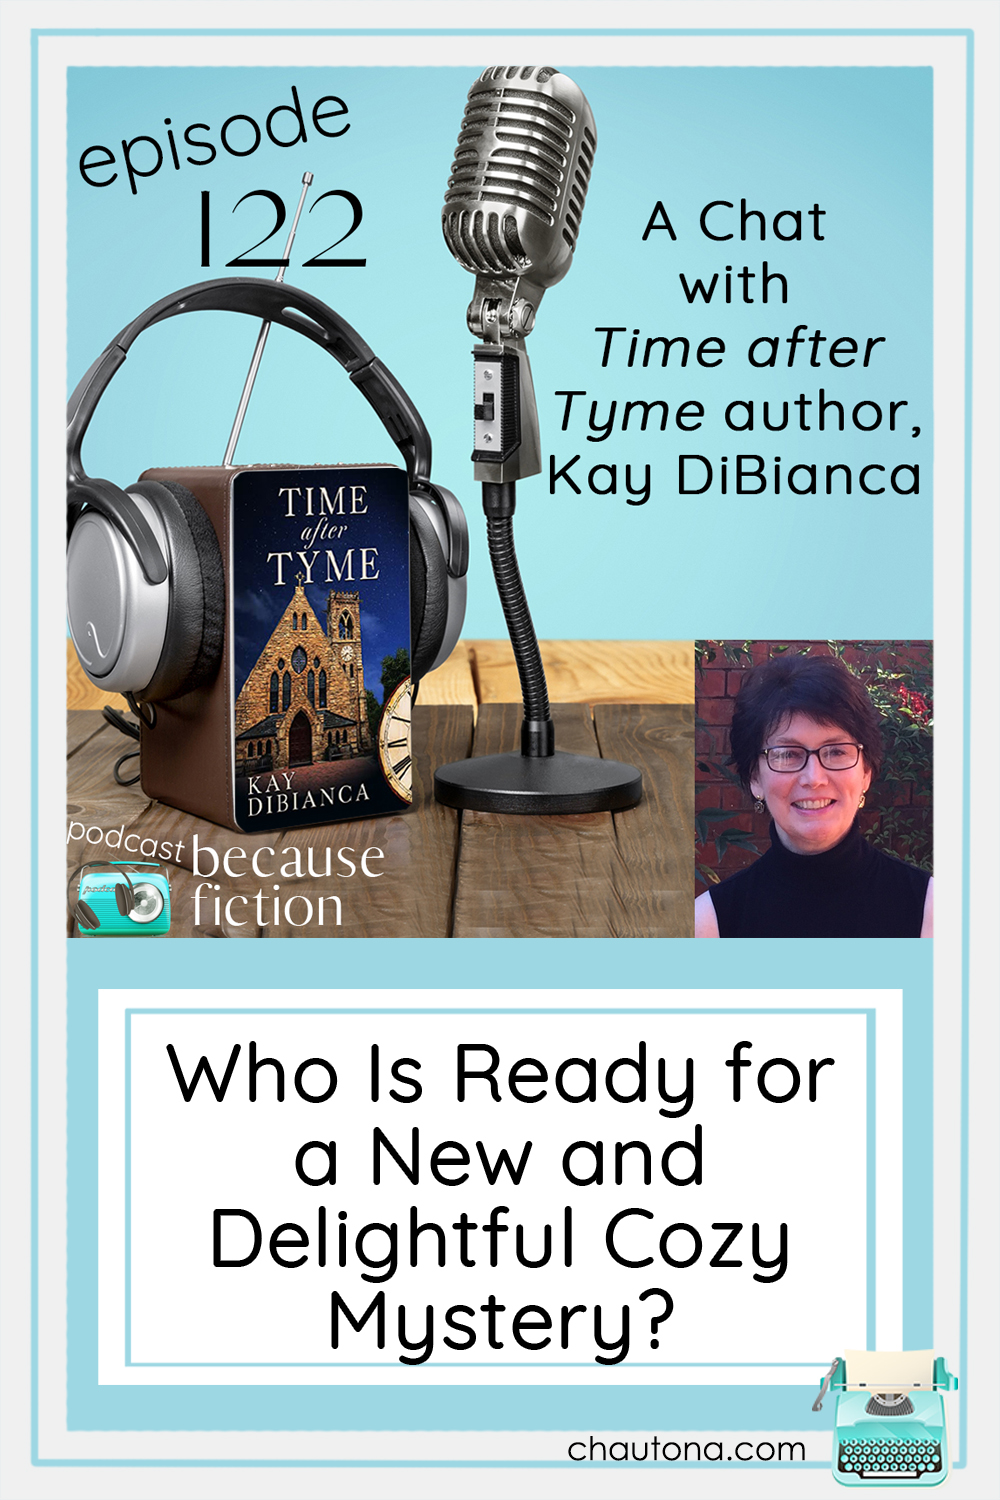 Kay DiBianca's latest mystery, Time after Tyme, opens with a brilliant scene that may just have become my new favorite. via @chautonahavig